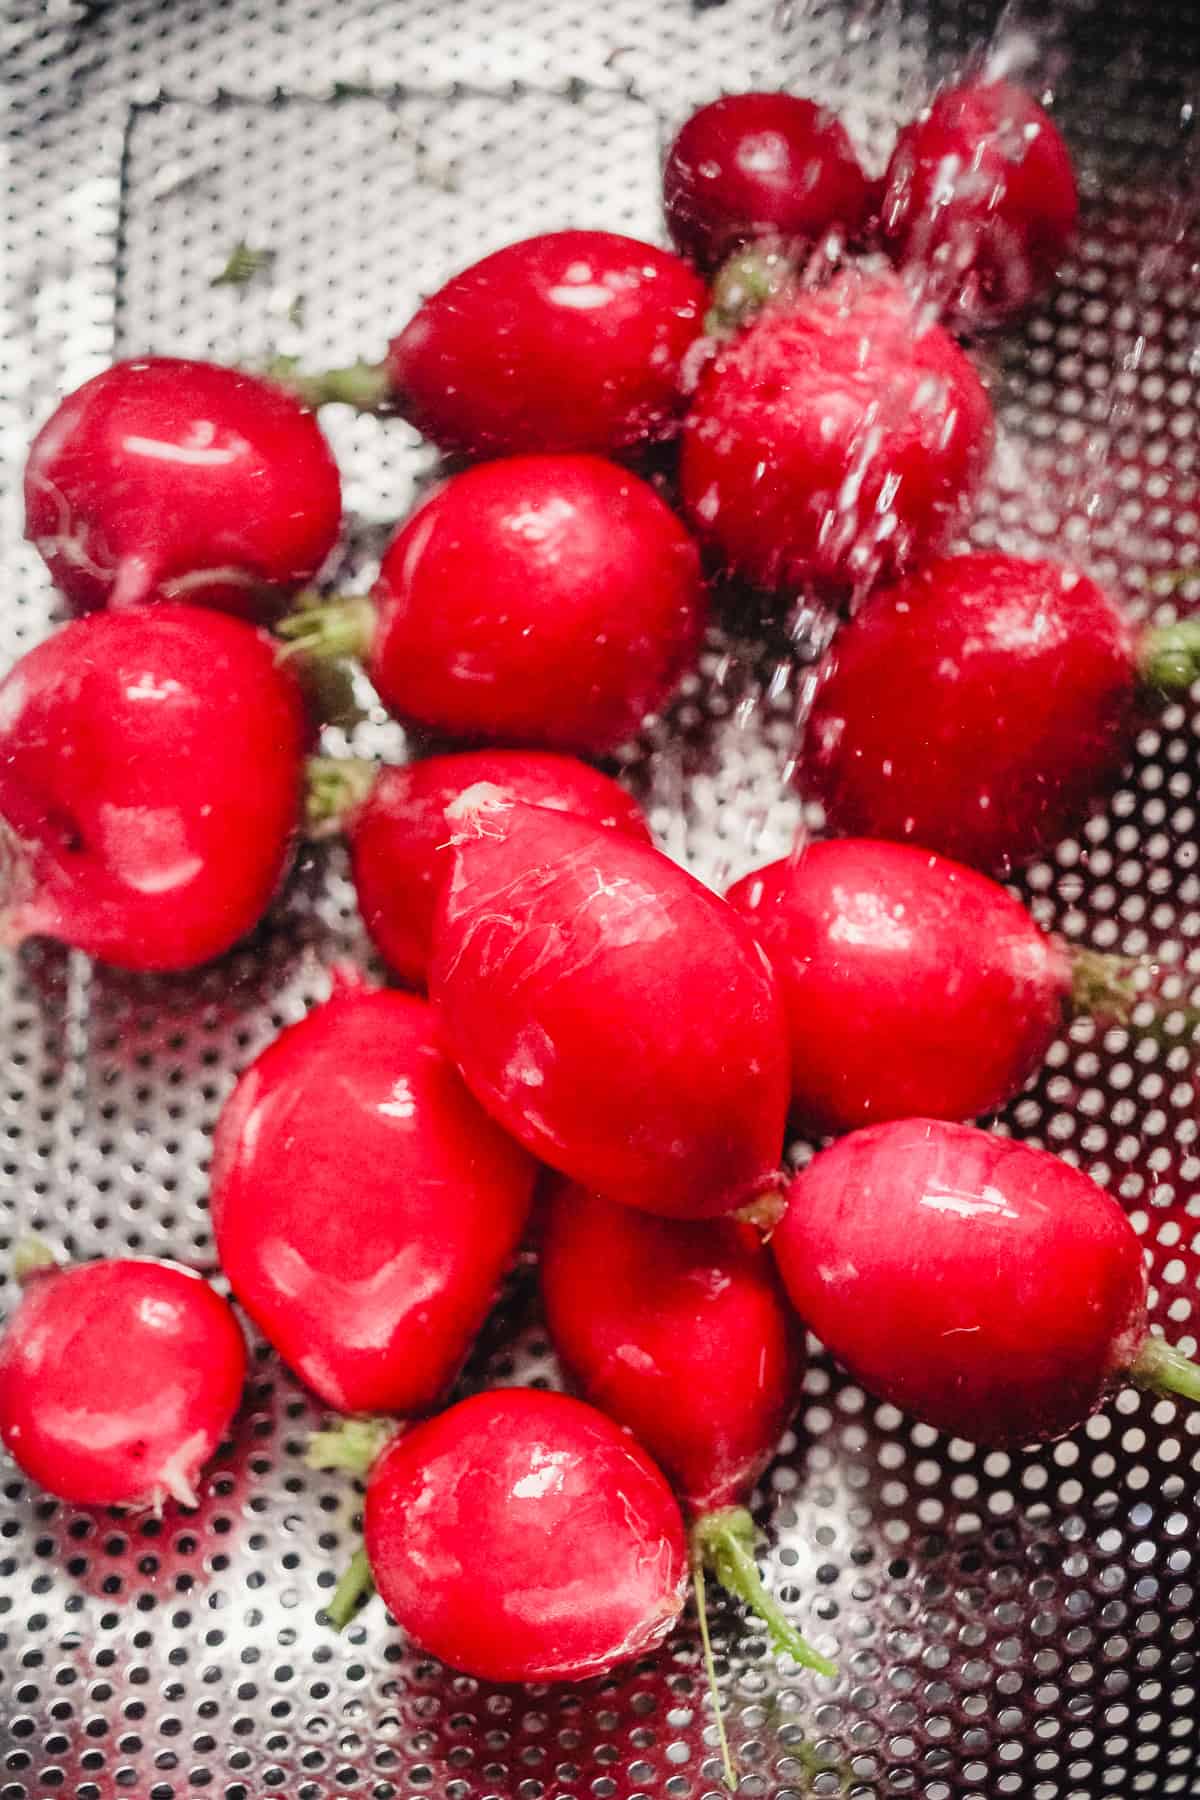 Wash the radishes in a colander in the sink.